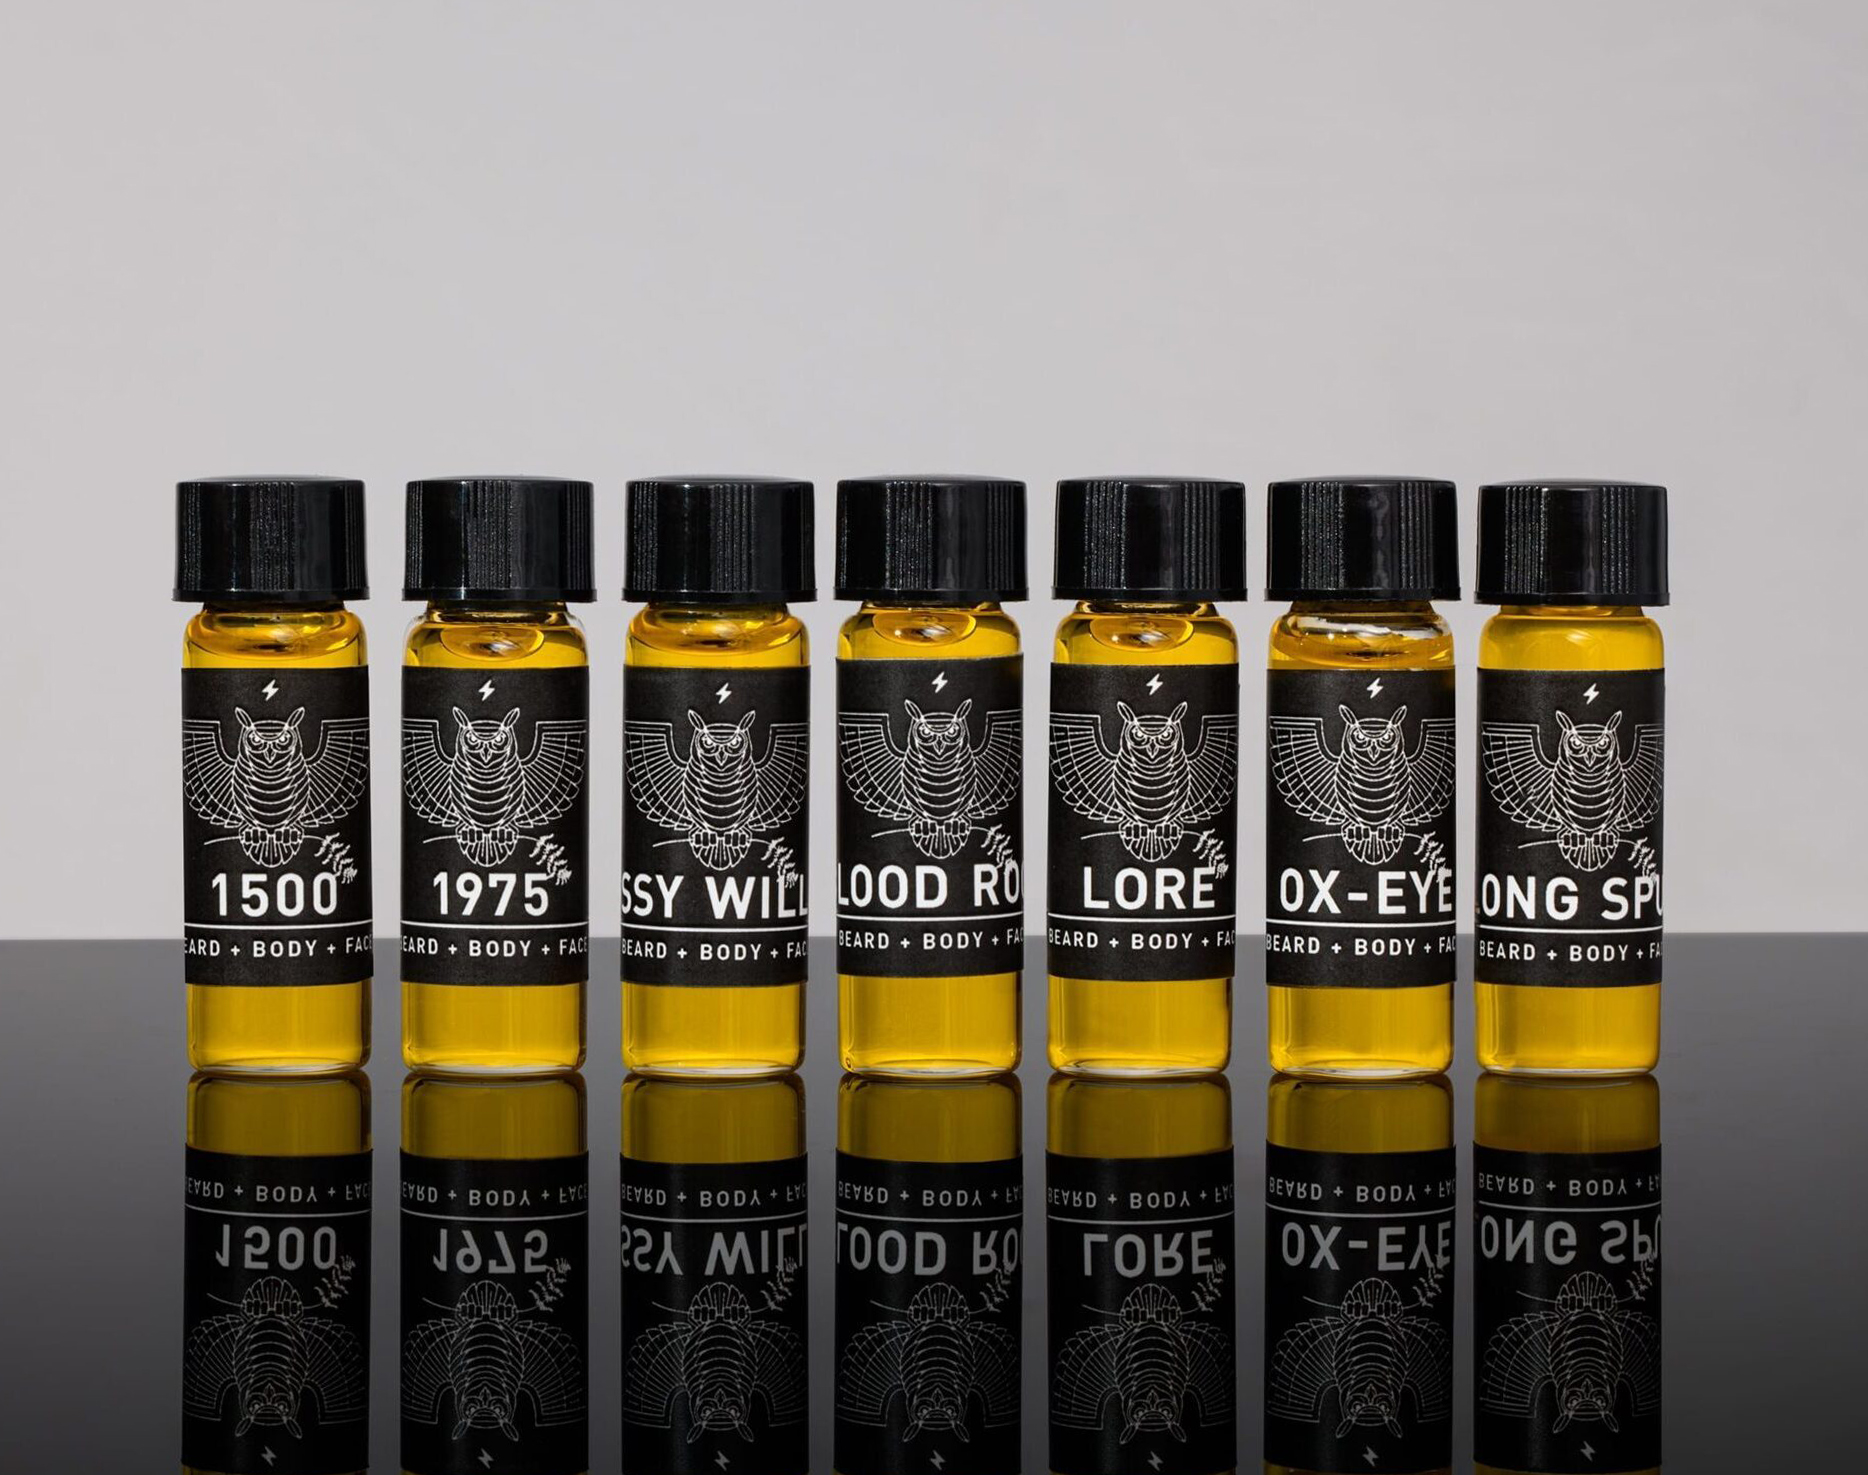 Luther Taylor Beard Oil Discover Kit
